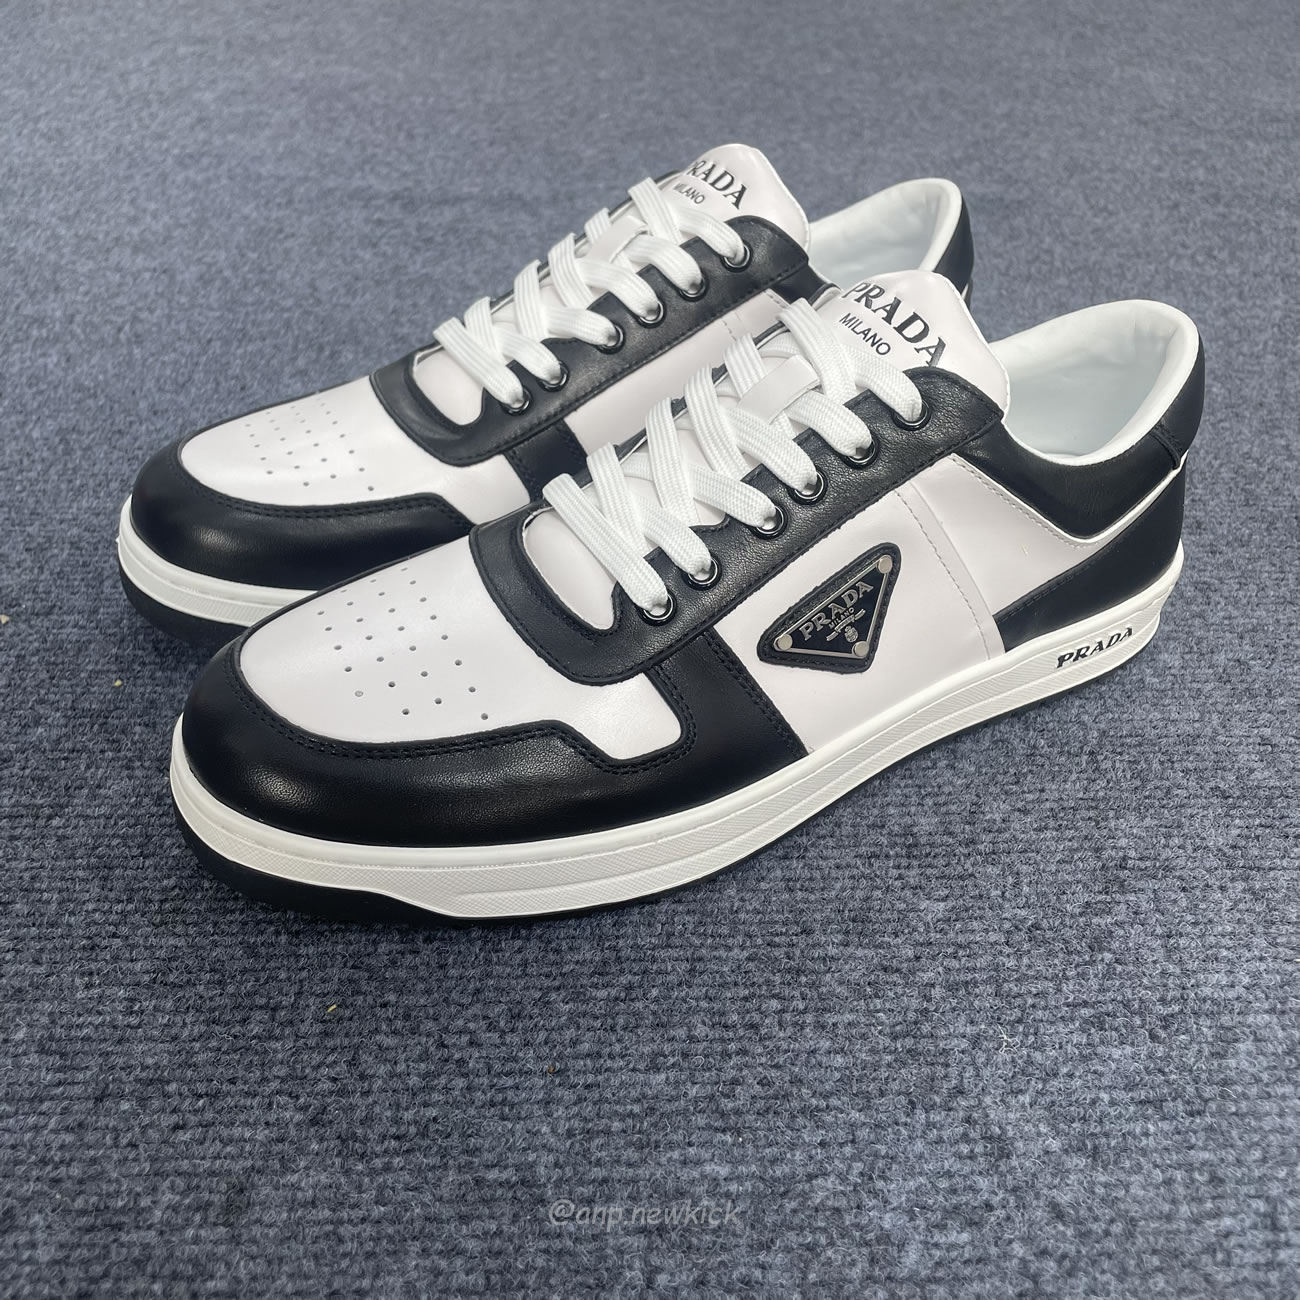 Prada Downtown Low Top Sneakers Leather White Black 2ee364 3lkg F0964 (5) - newkick.org